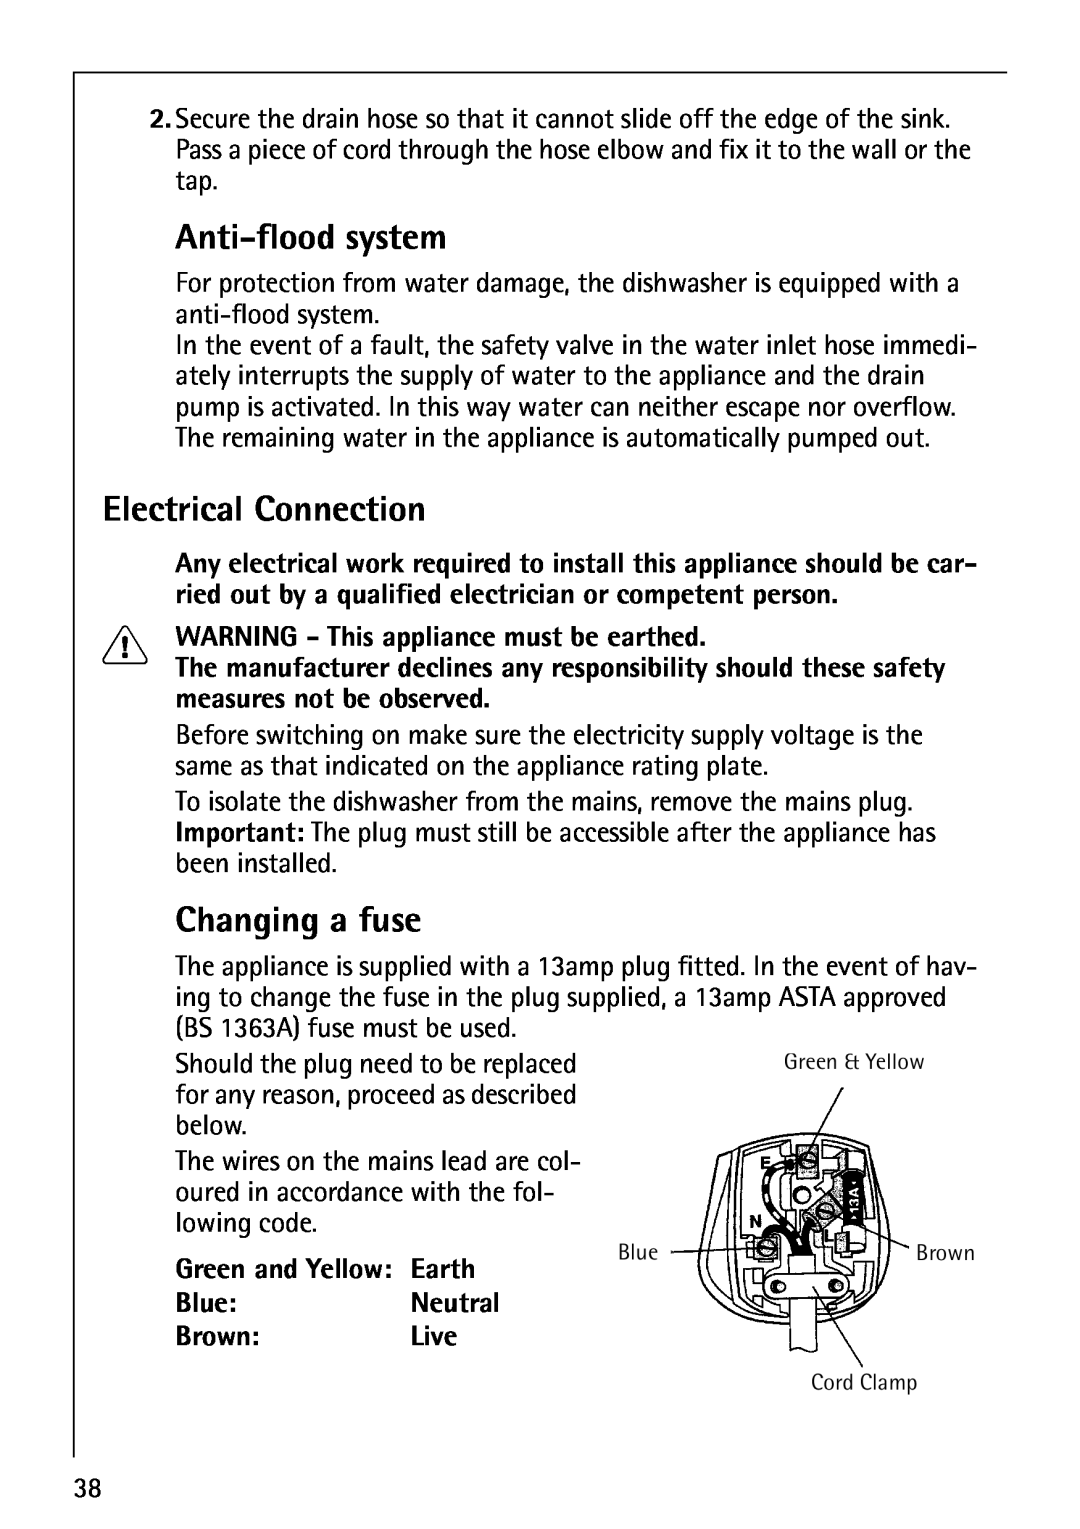 AEG 40660 manual Anti-floodsystem, Electrical Connection, Changing a fuse, WARNING - This appliance must be earthed 